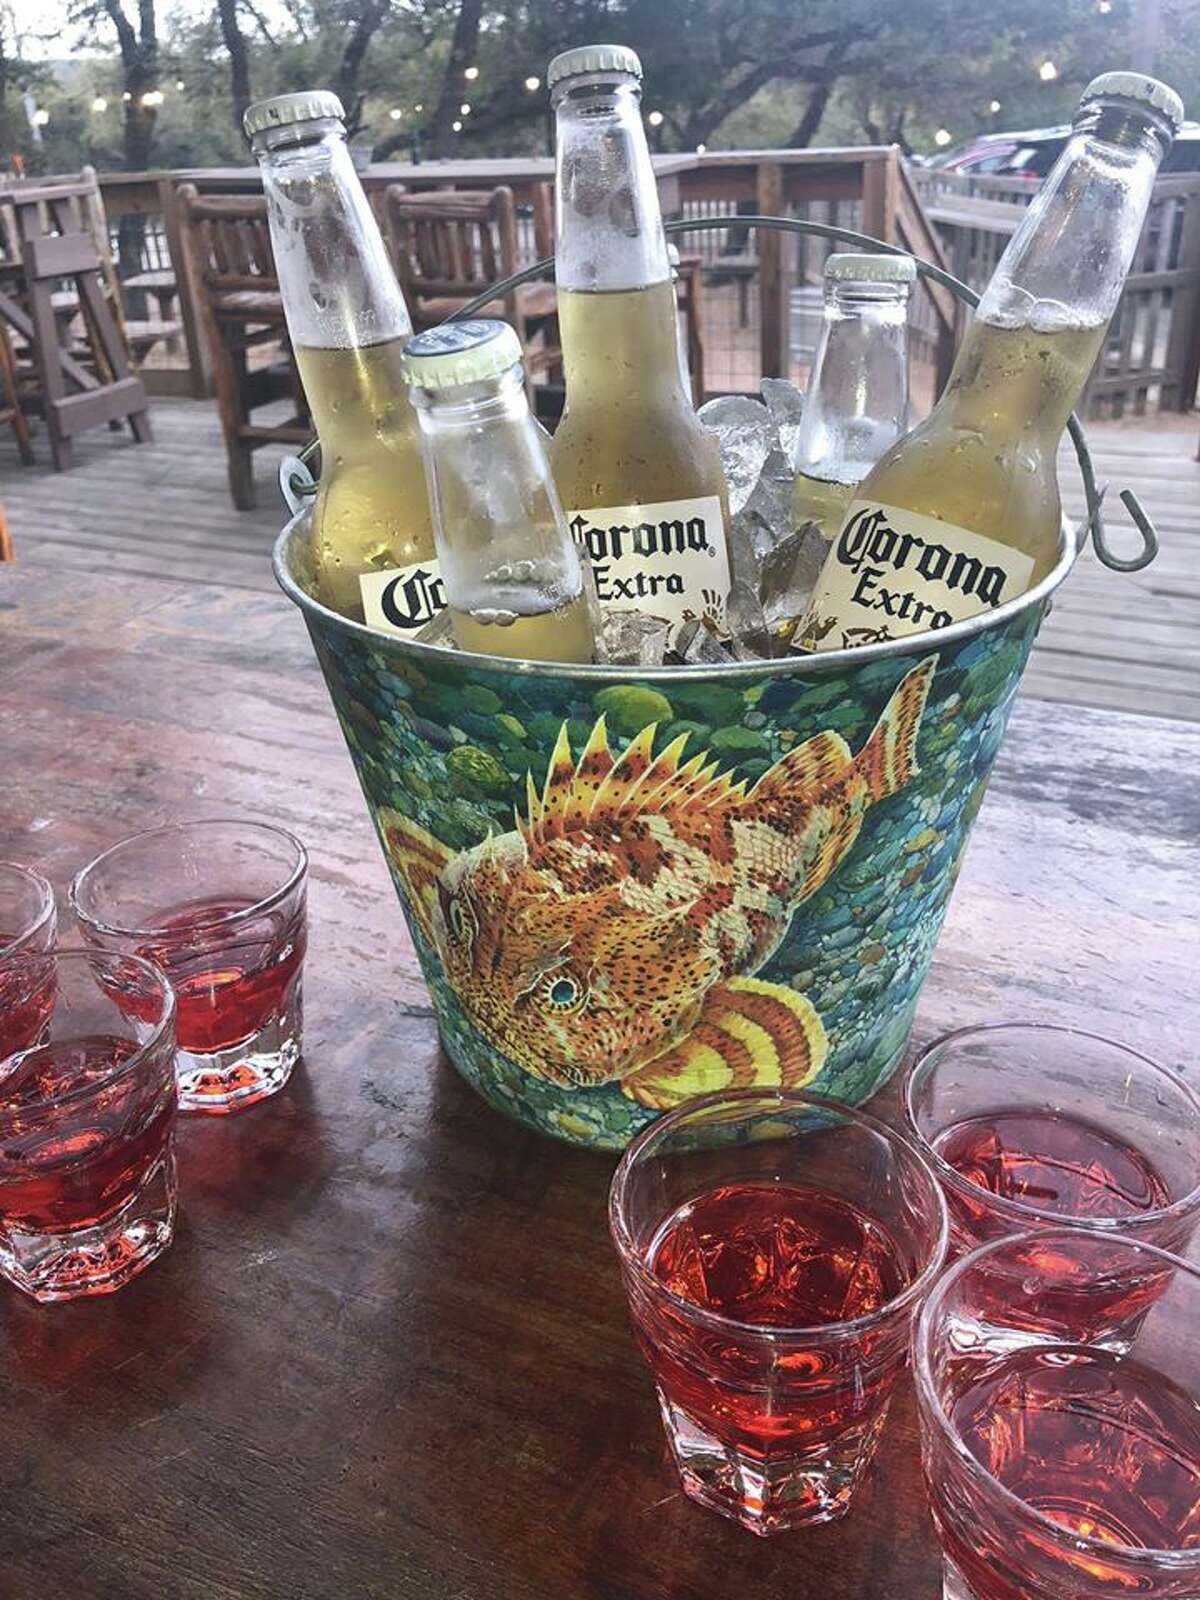 151 Saloon, a bar and dancehall, is promoting a special called the "Pandemic" this week, presumably referring to coronavirus, the disease that has infected and killed thousands worldwide. For $20, patrons will receive a bucket of six Corona beers and six shots of "Antidote," according to social media posts.